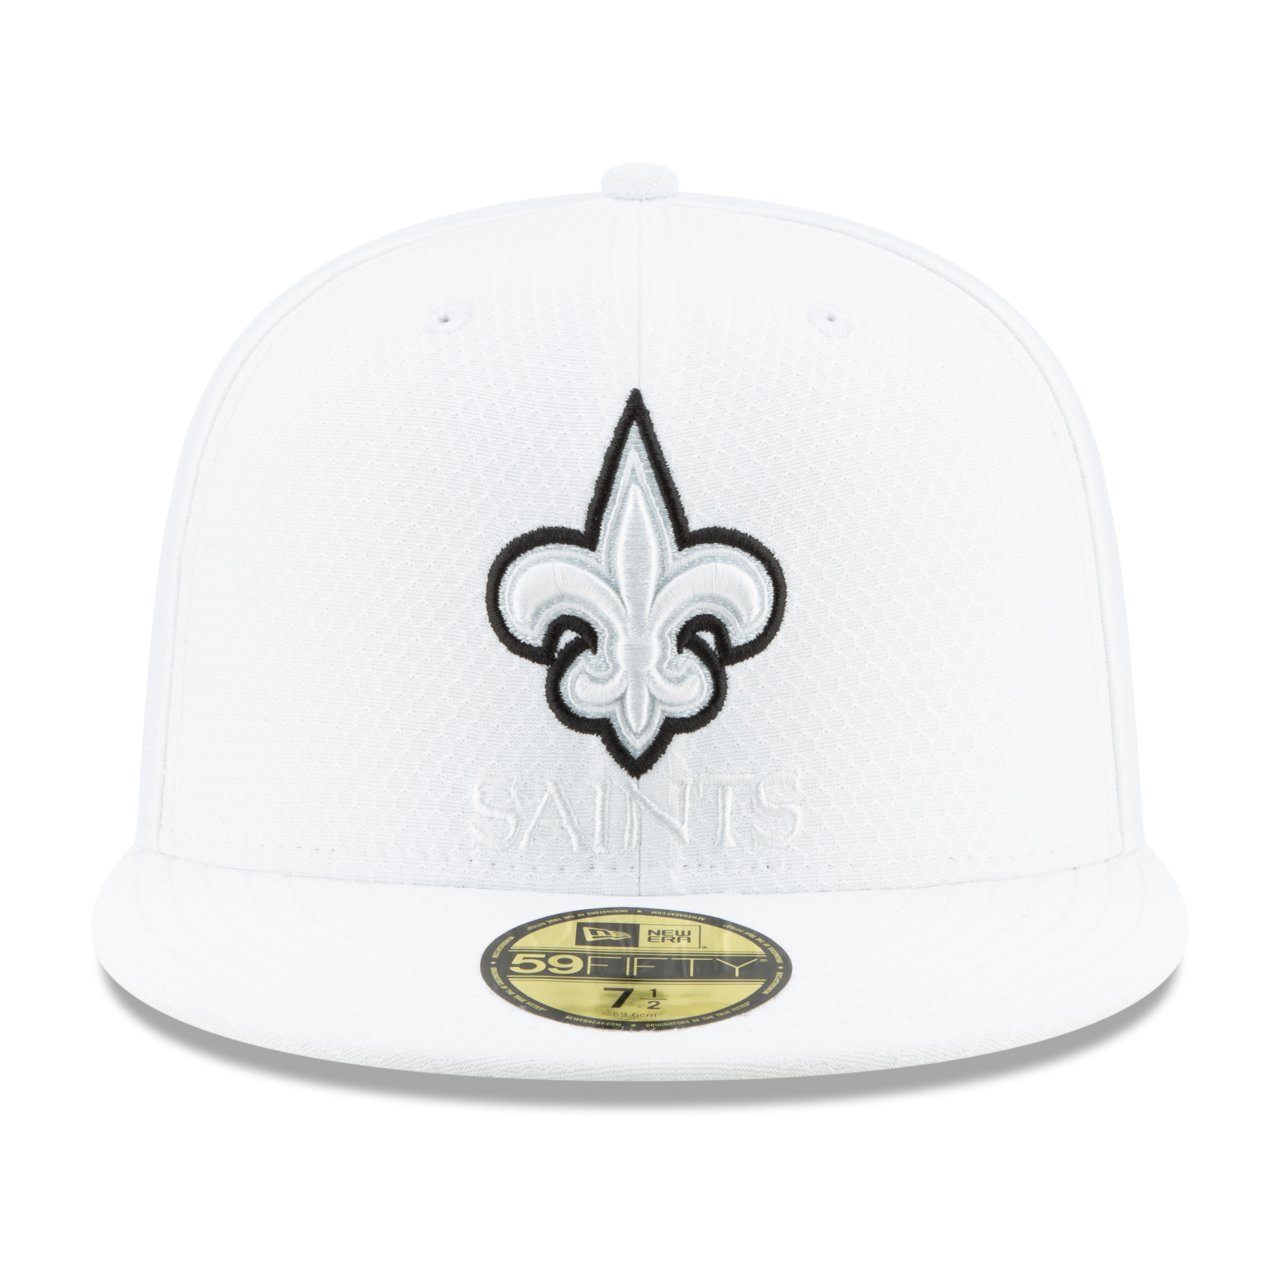 New Era 59Fifty Fitted NFL Saints Cap New Orleans PLATINUM Sideline